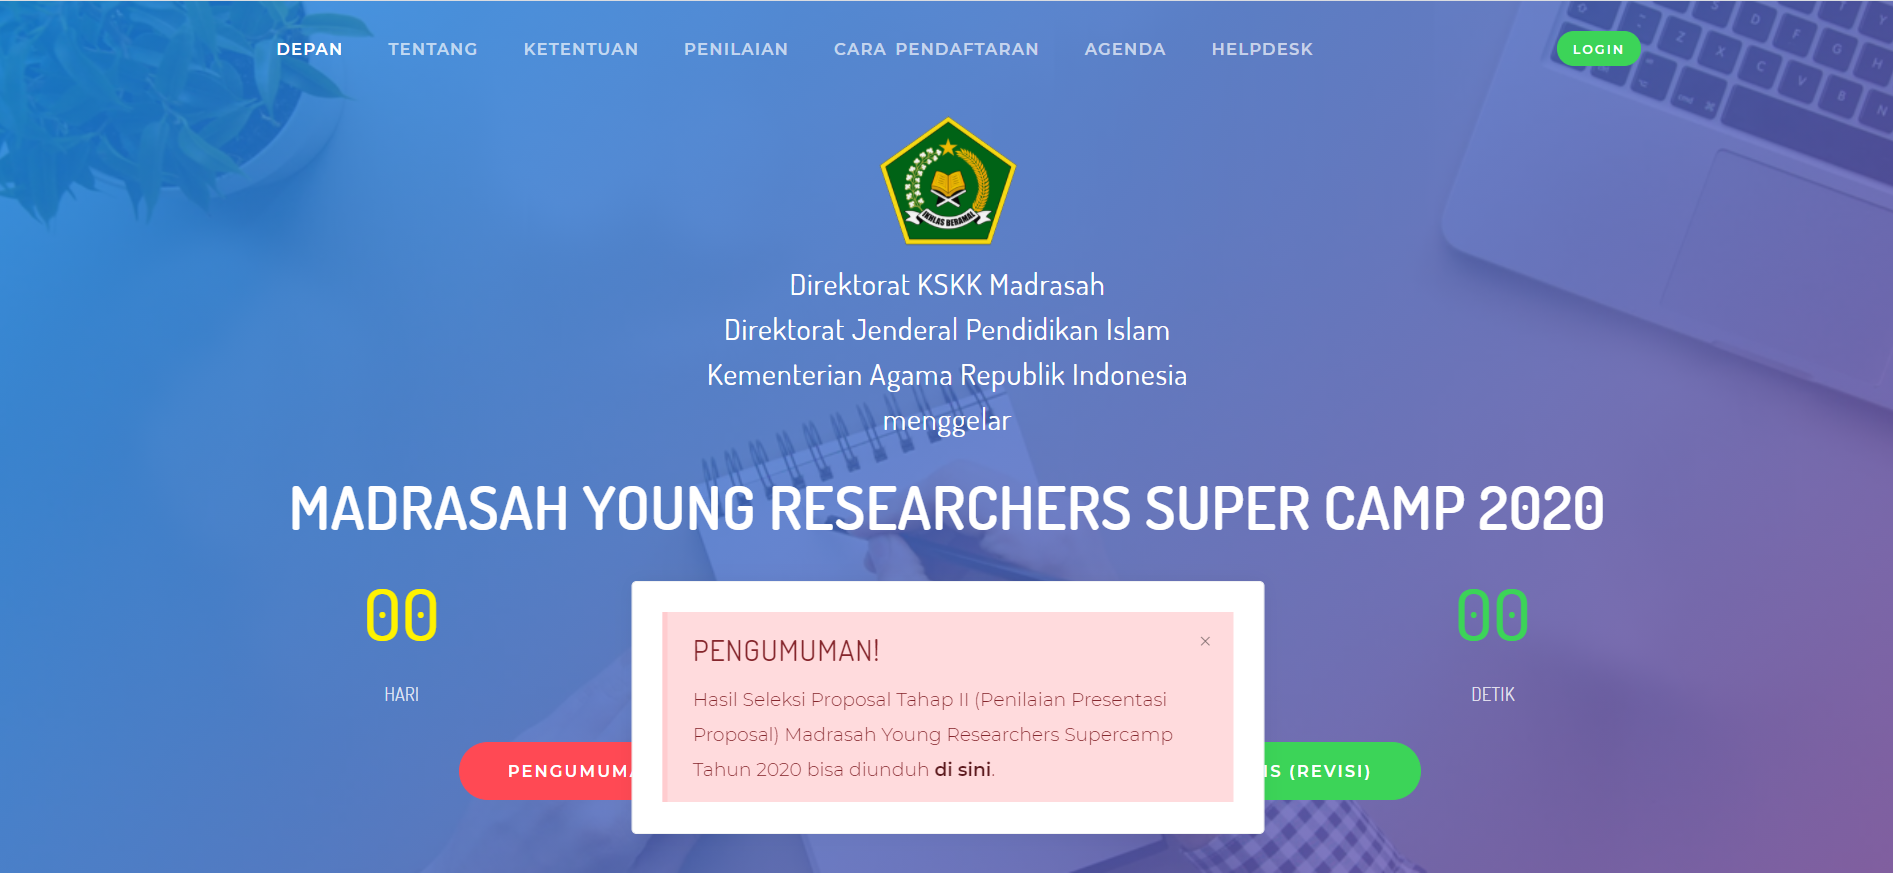 MADRASAH YOUNG RESEARCHERS SUPER CAMP 2020